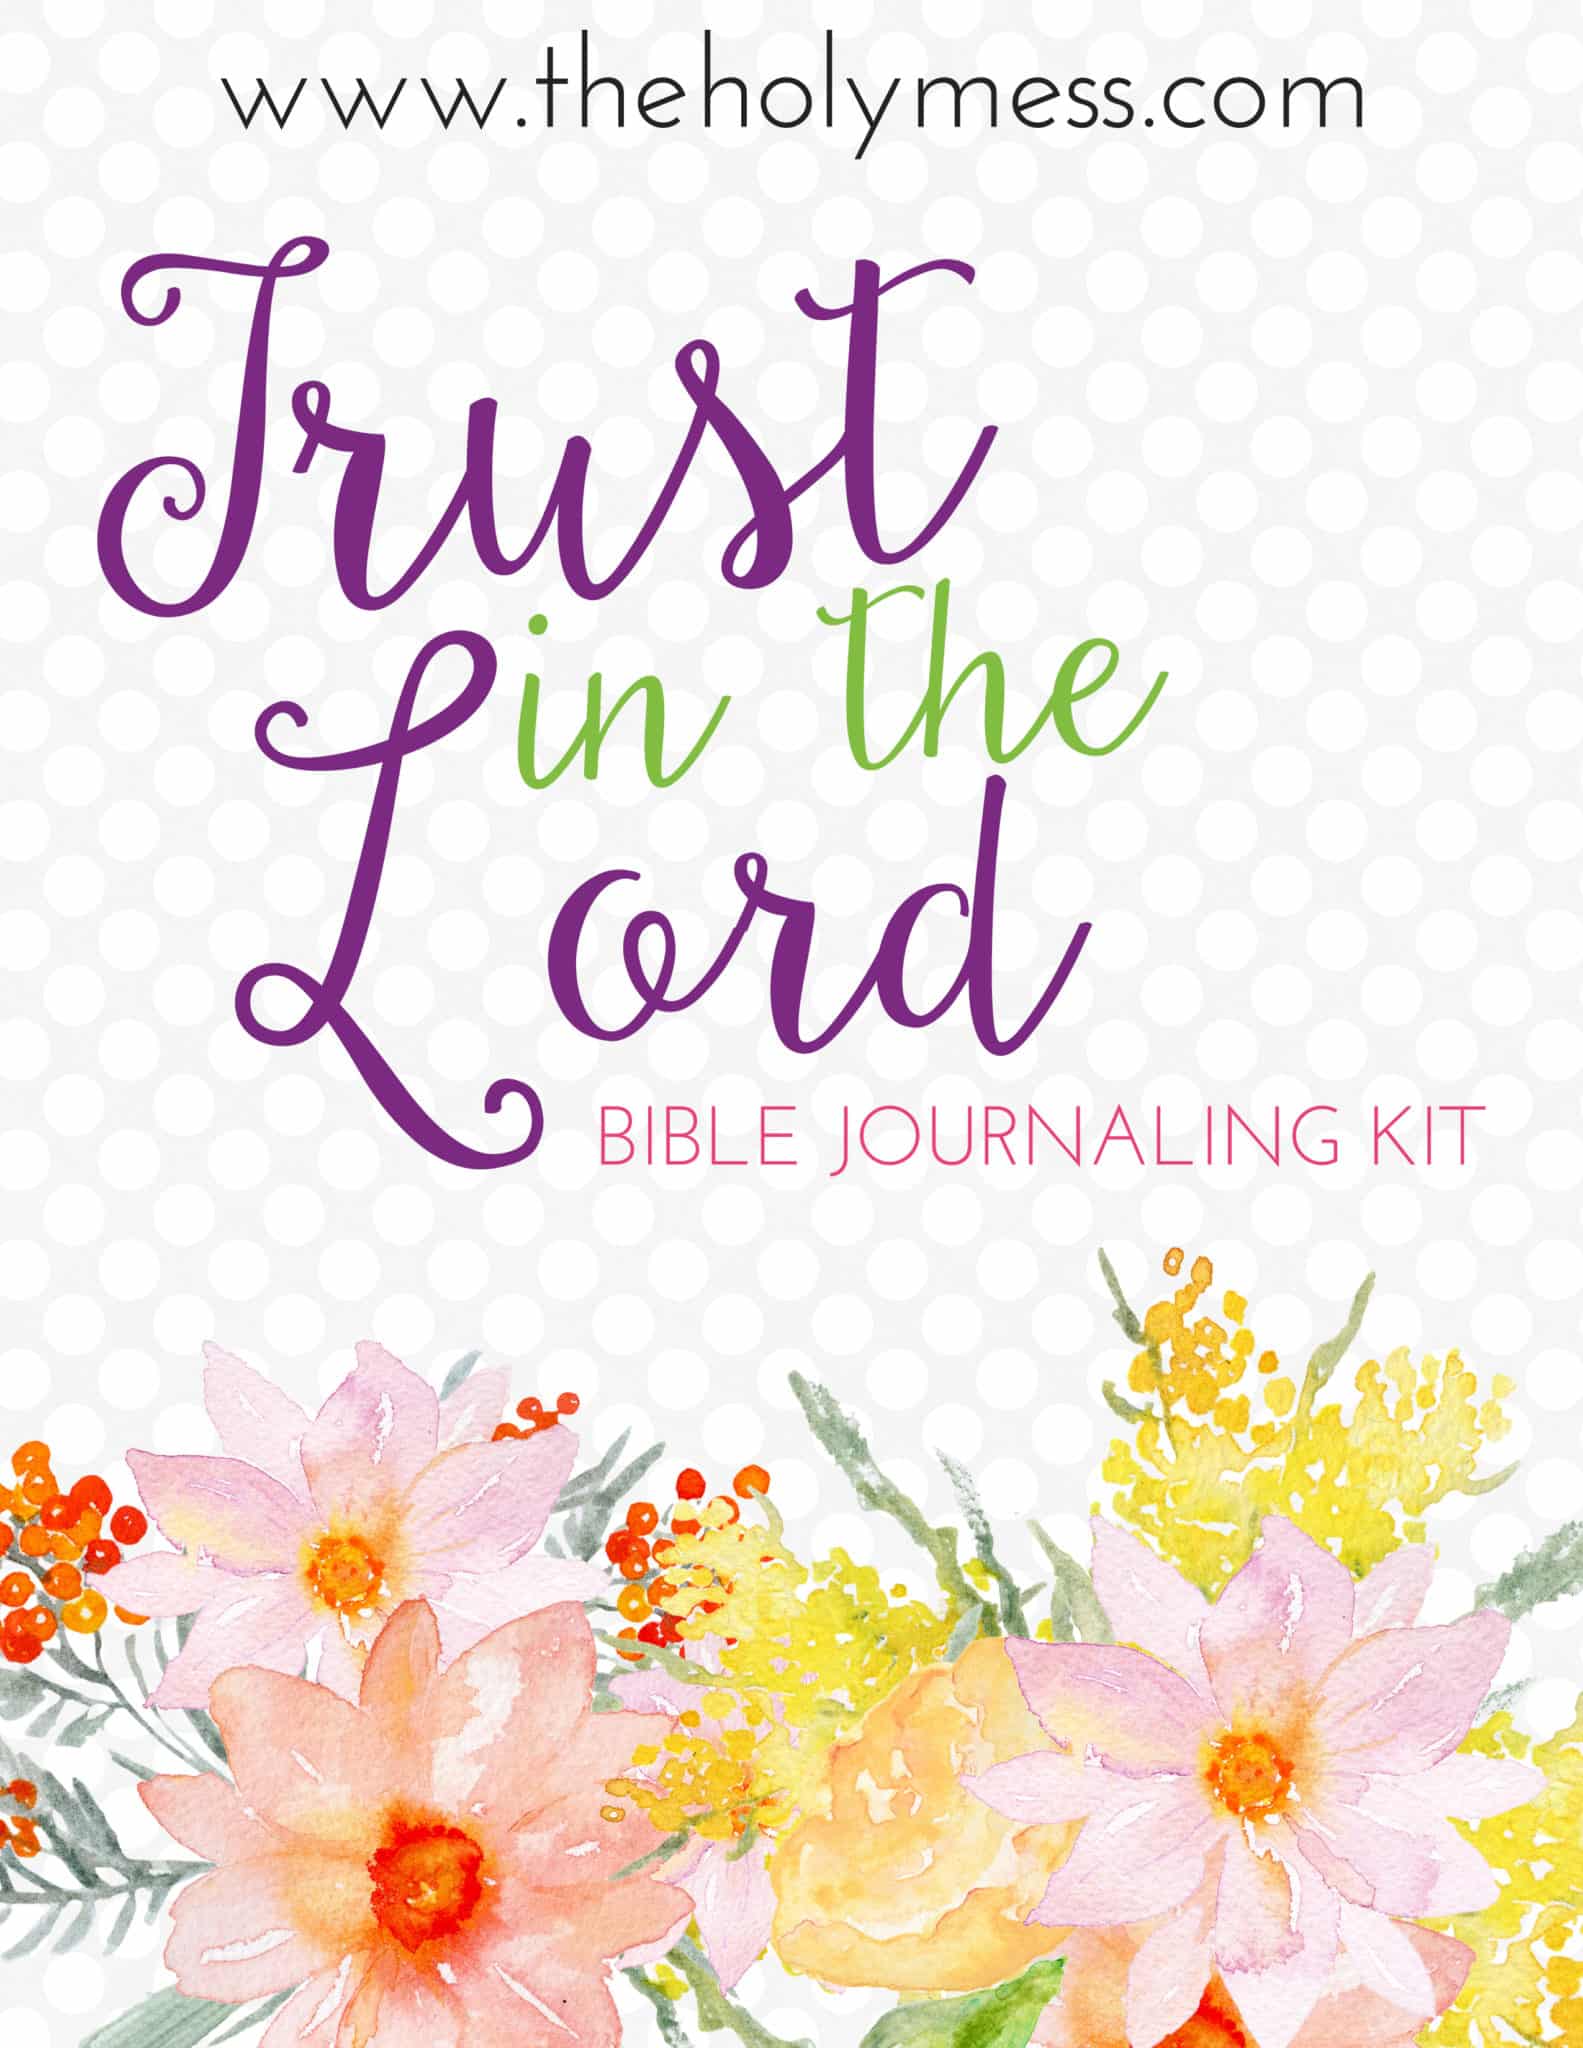 Why We Can Trust in the Lord: 5 Ways to Do It. How about if we trust in the Lord and didn’t think of a Plan B. What if we put our stake in the ground and told ourselves there isn’t another way. God is the answer, the only answer. #trustintheLordinhardtimes #inspiration #Biblejournaling #Bibleverses